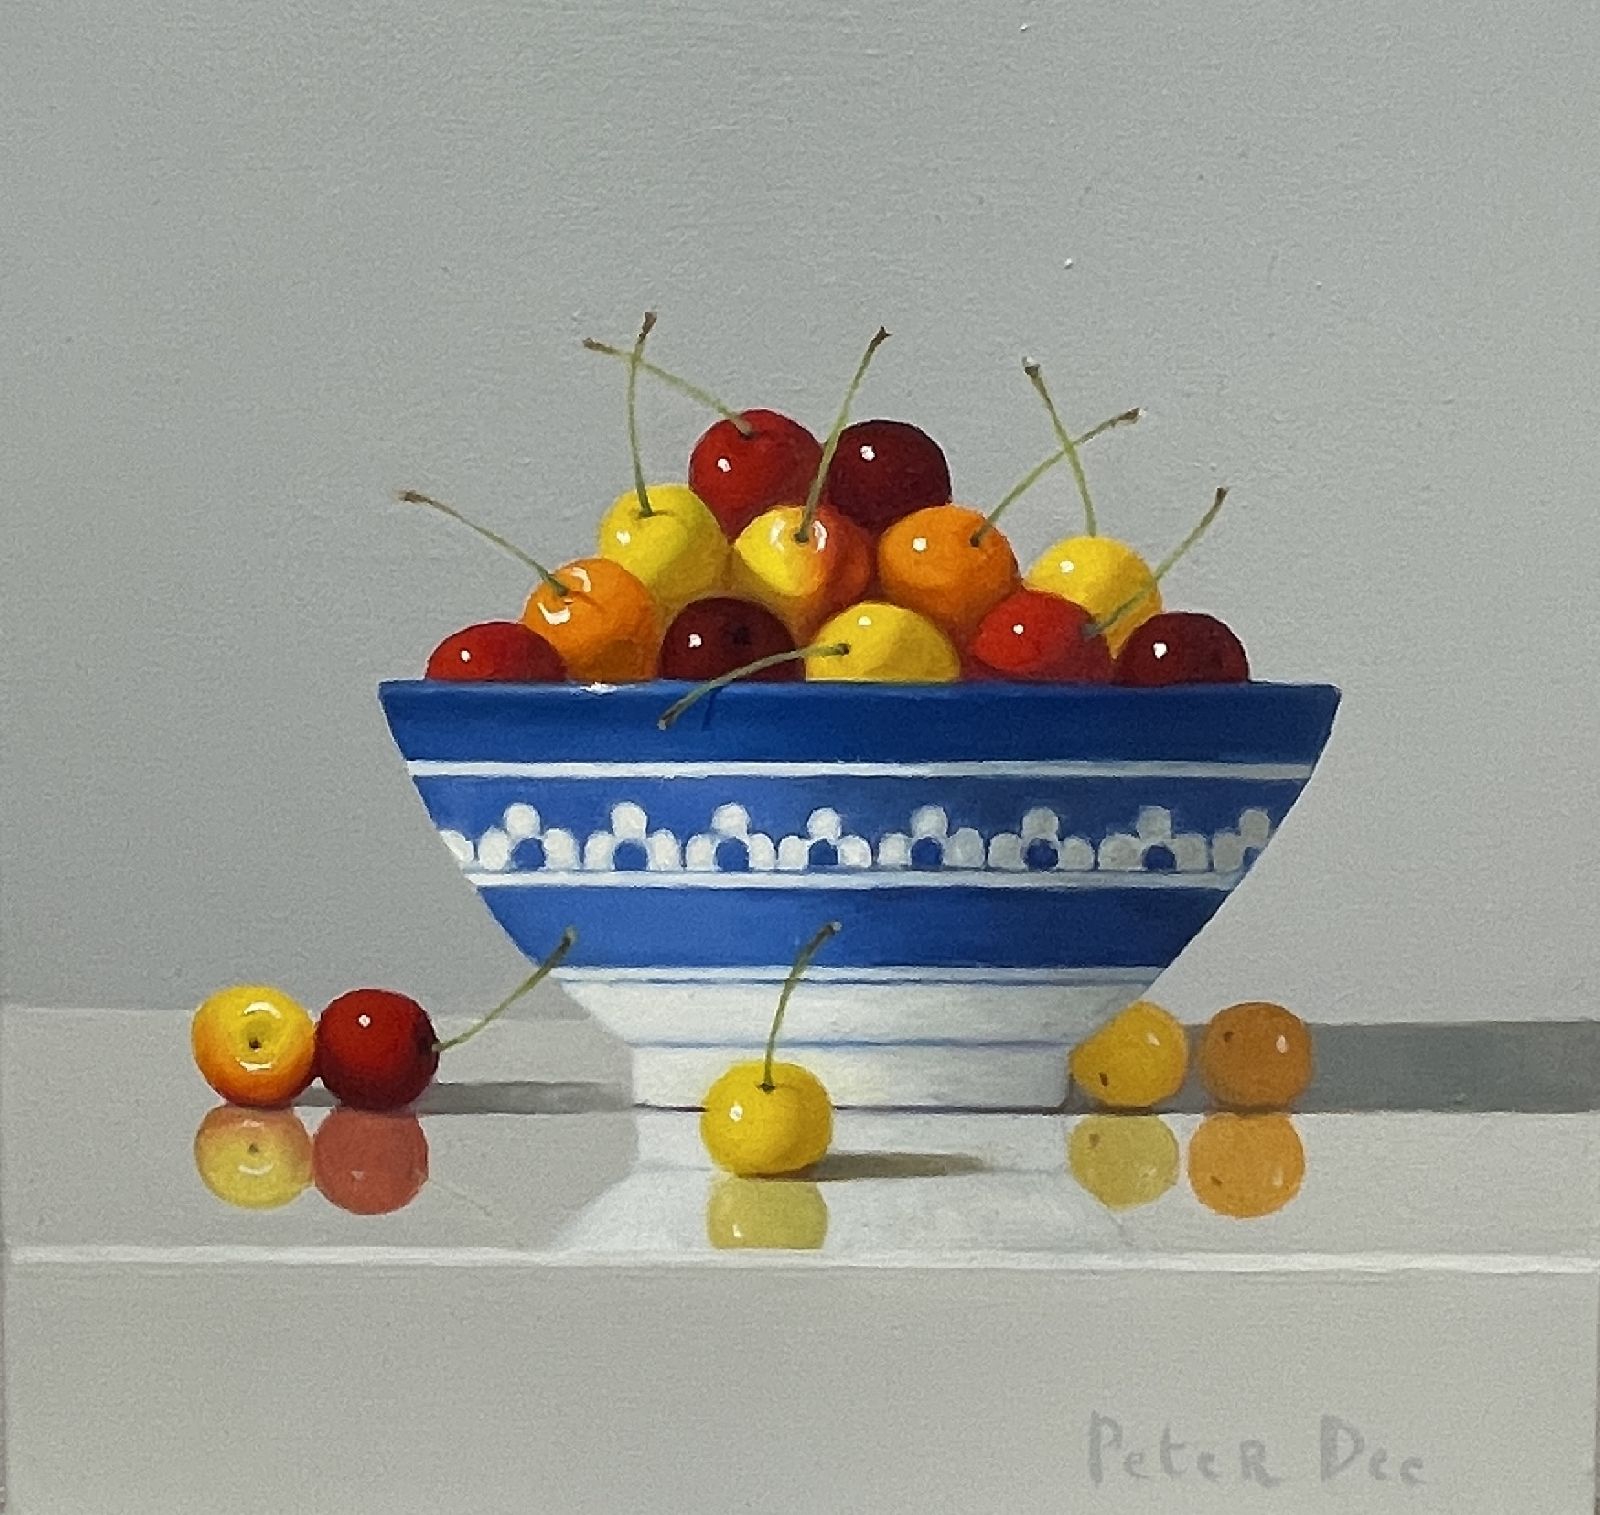 Peter Dee - Blue and White Bowl with Rainier Cherries